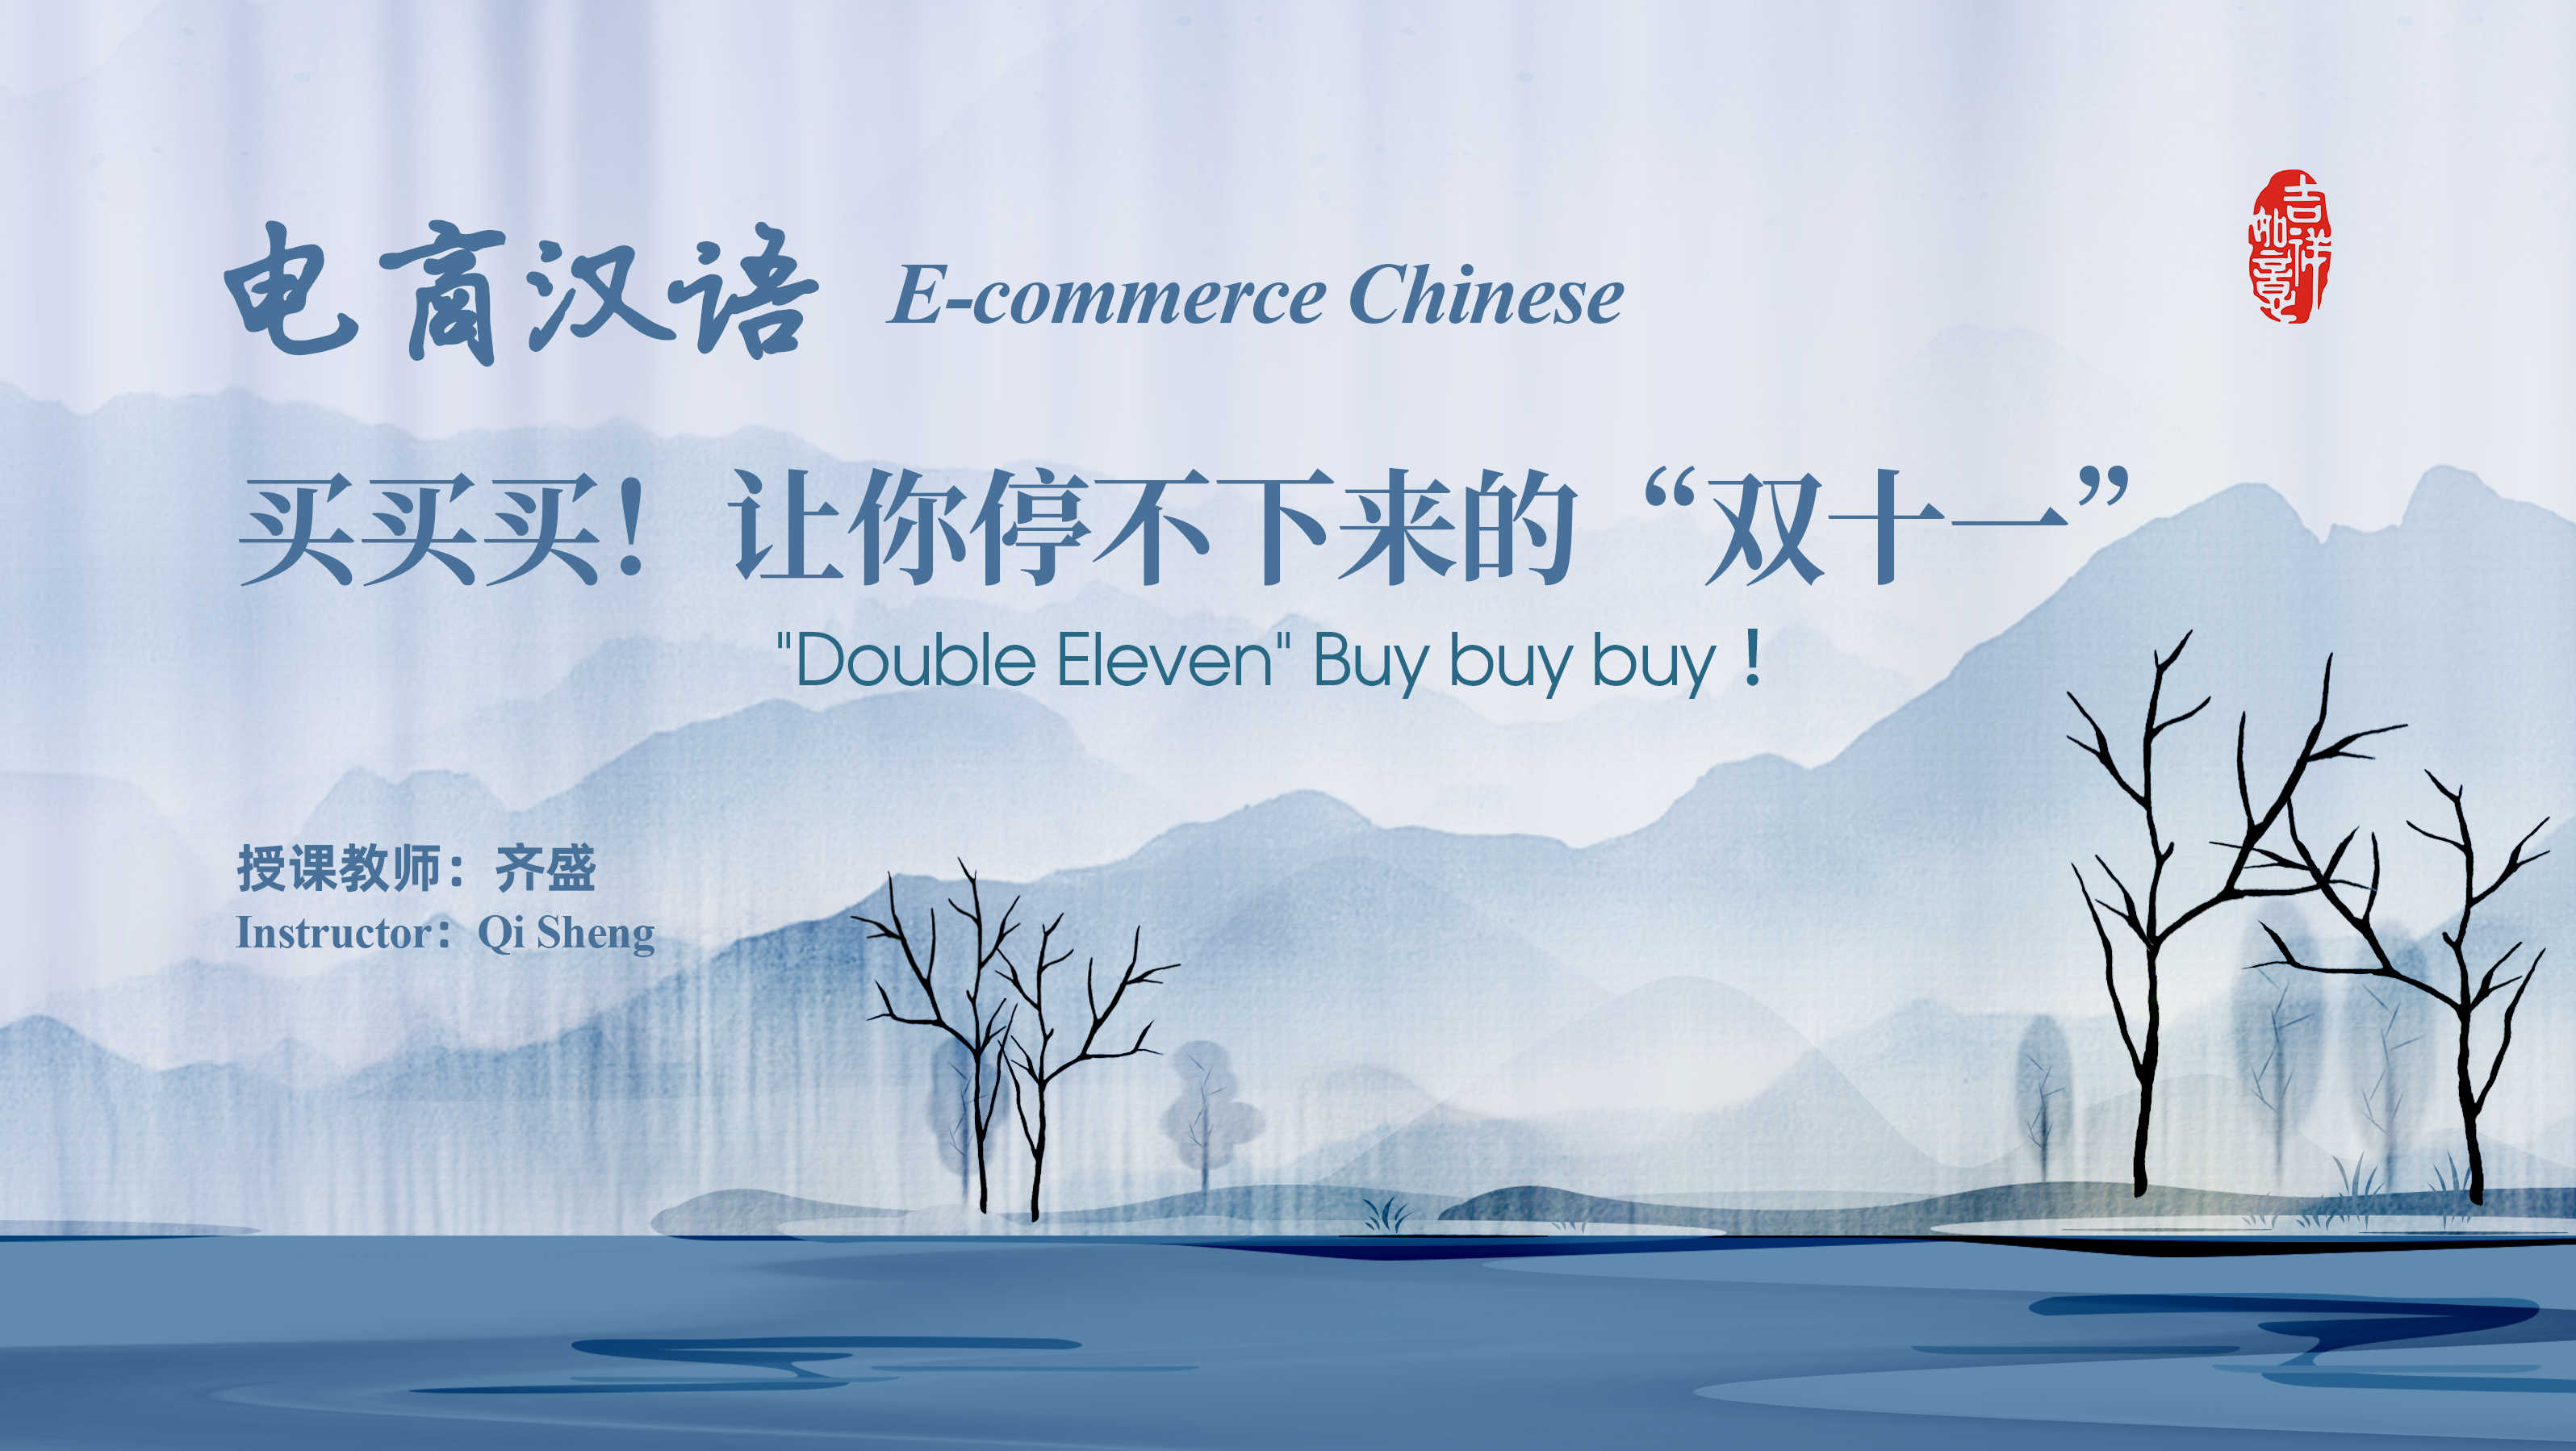 E-commerce Chinese “Double Eleven” Buy buy buy ！